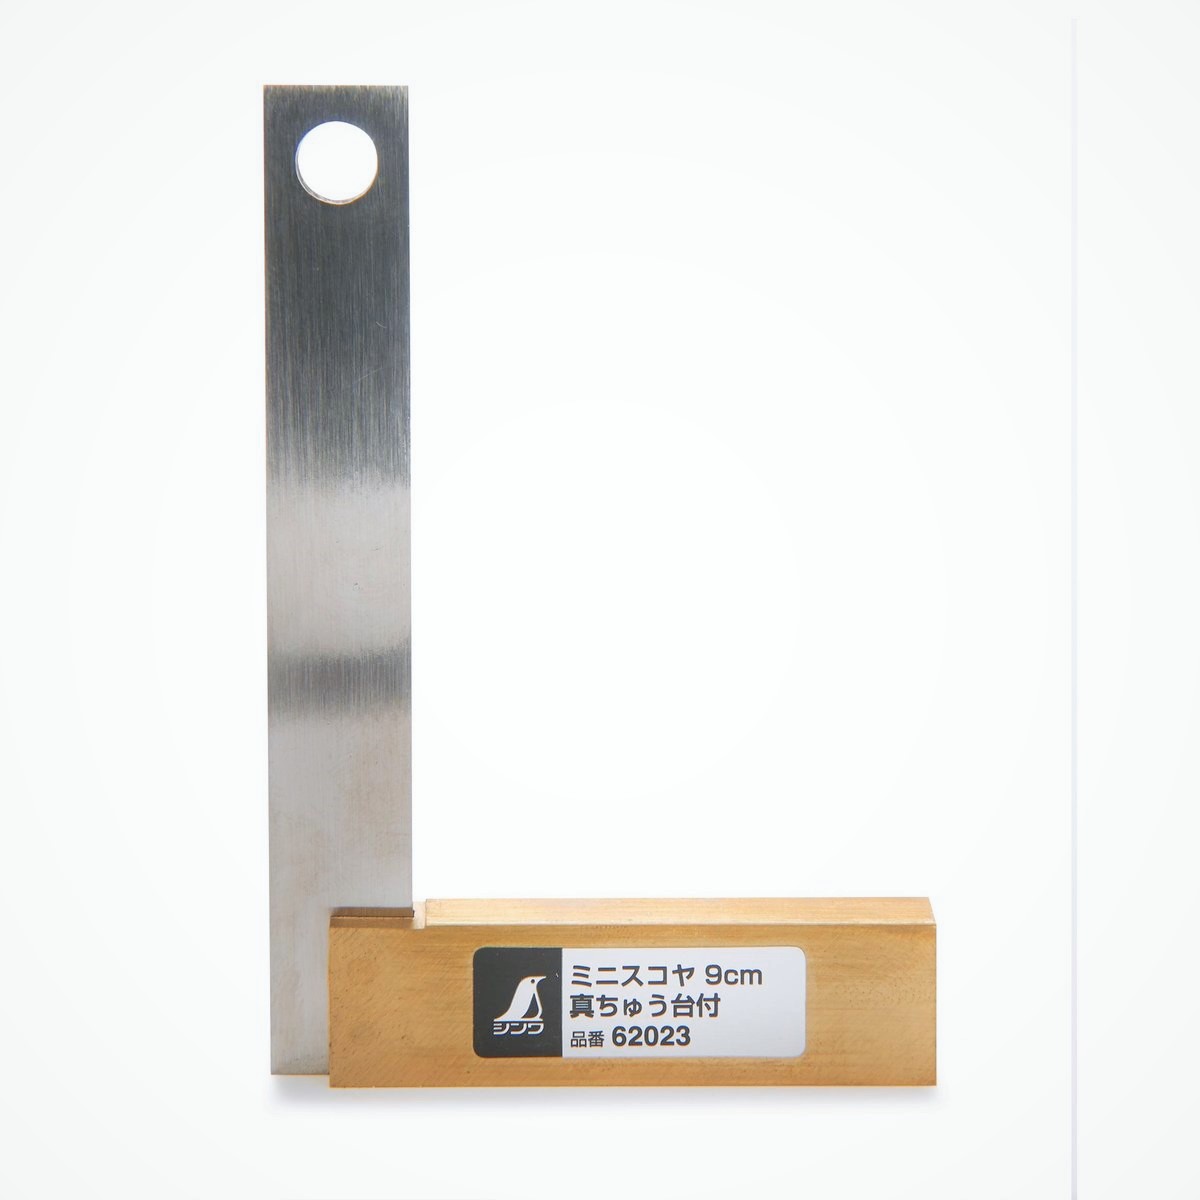 Japanese Mini Try Square Stainless Steel Blade 45 60 100mm Engineering Square